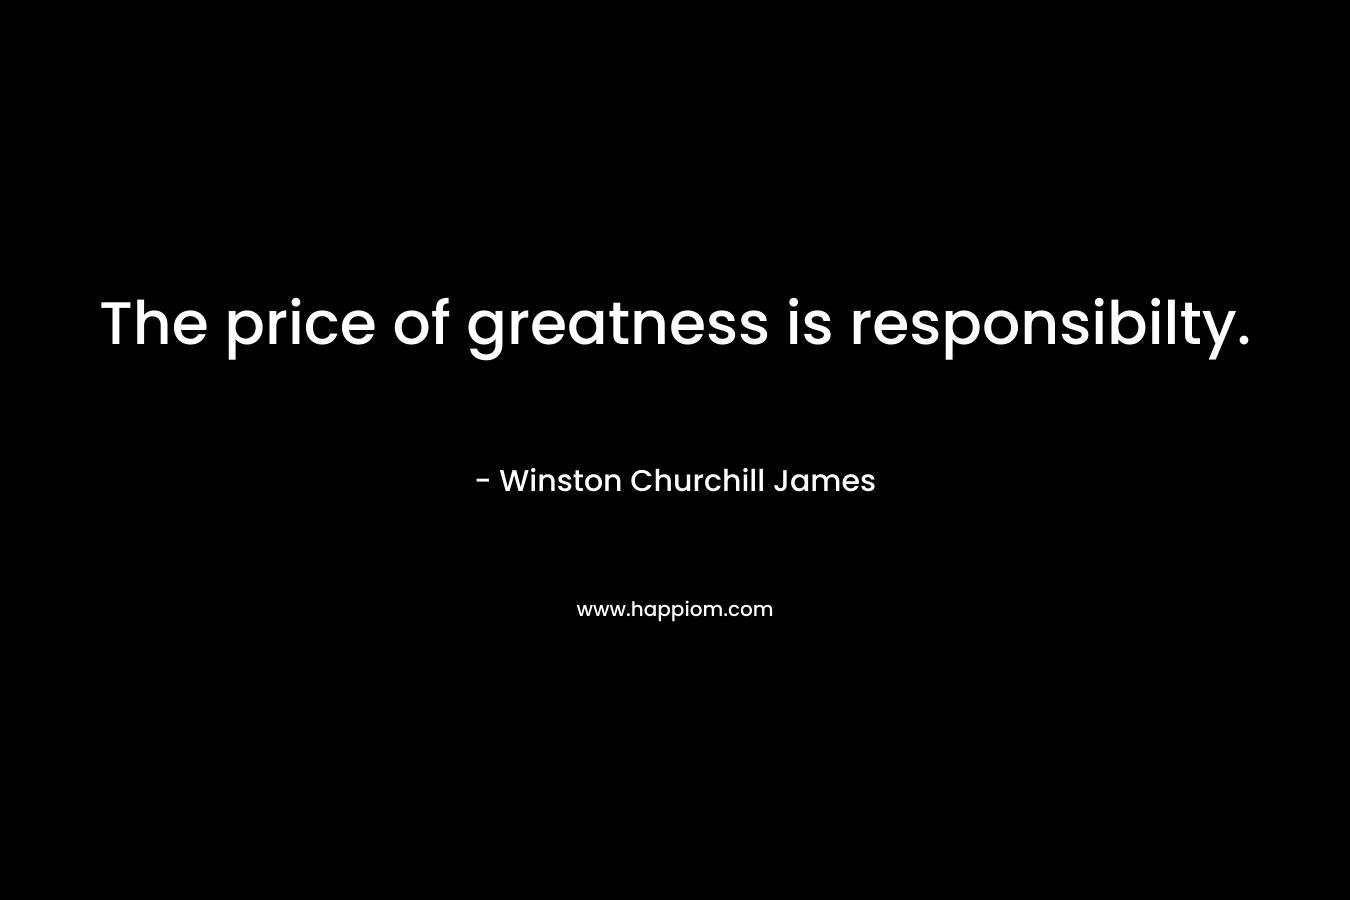 The price of greatness is responsibilty.